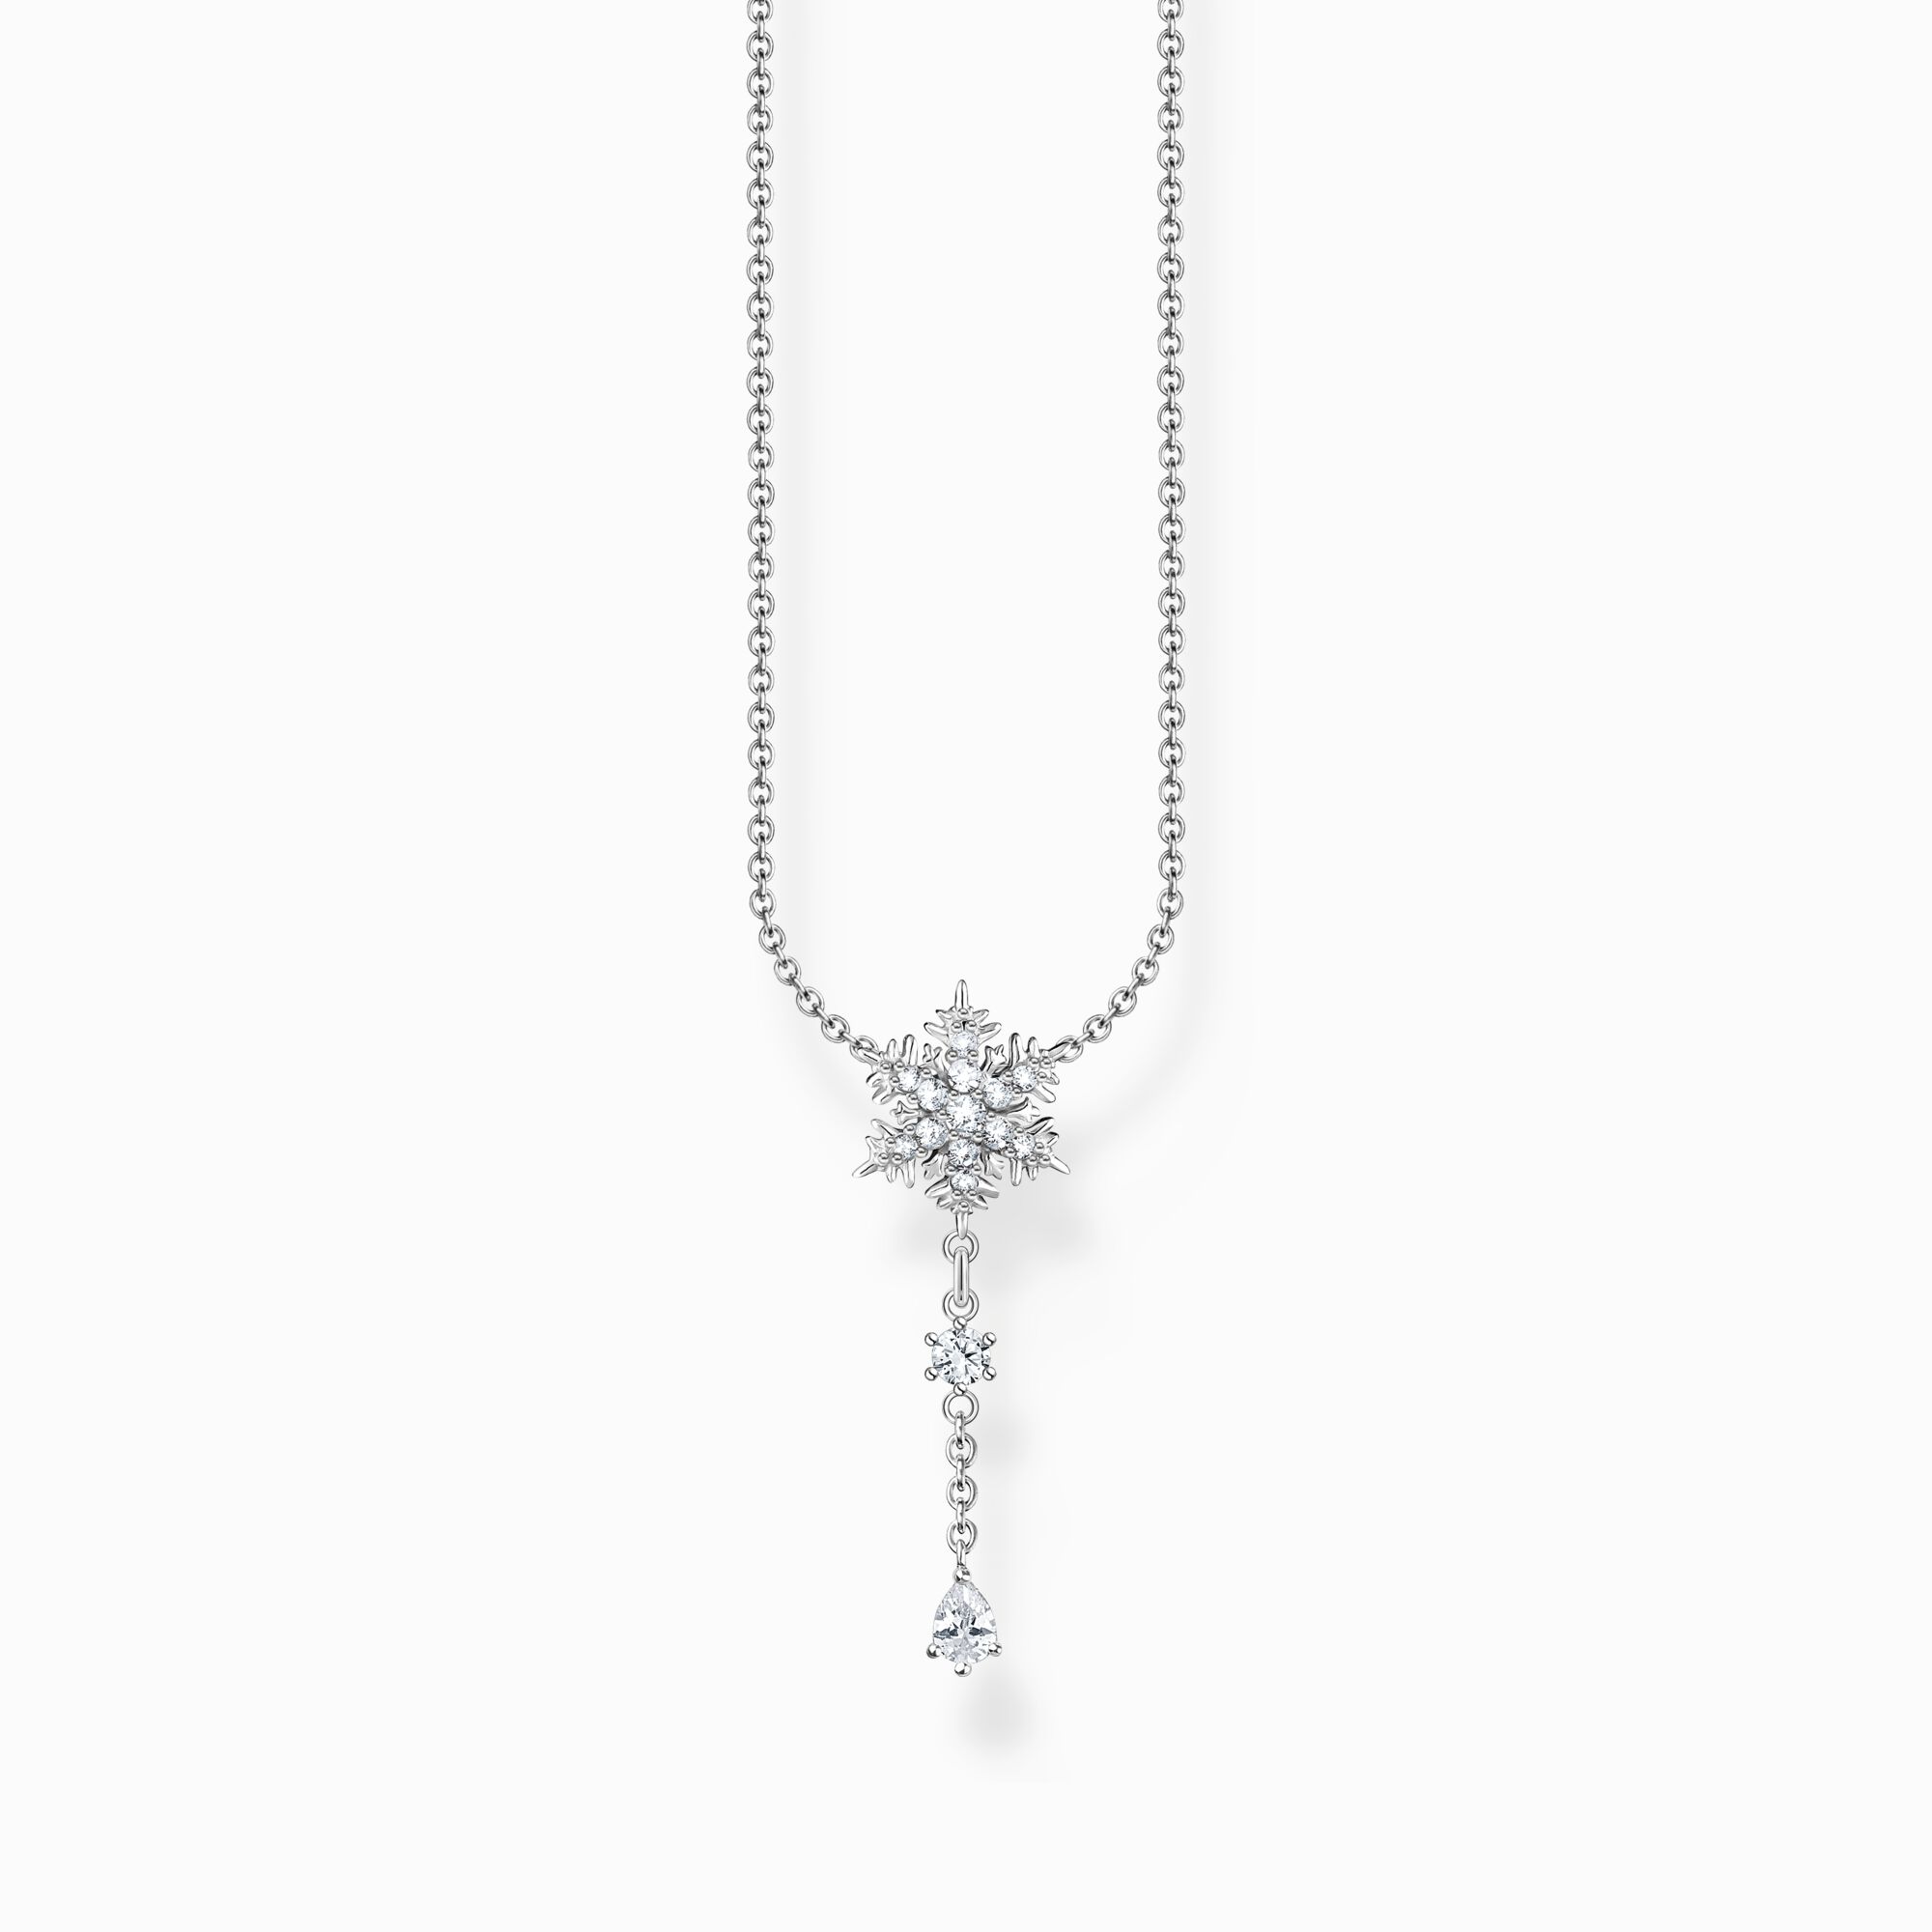 Necklace snowflake with white stones silver from the Charming Collection collection in the THOMAS SABO online store